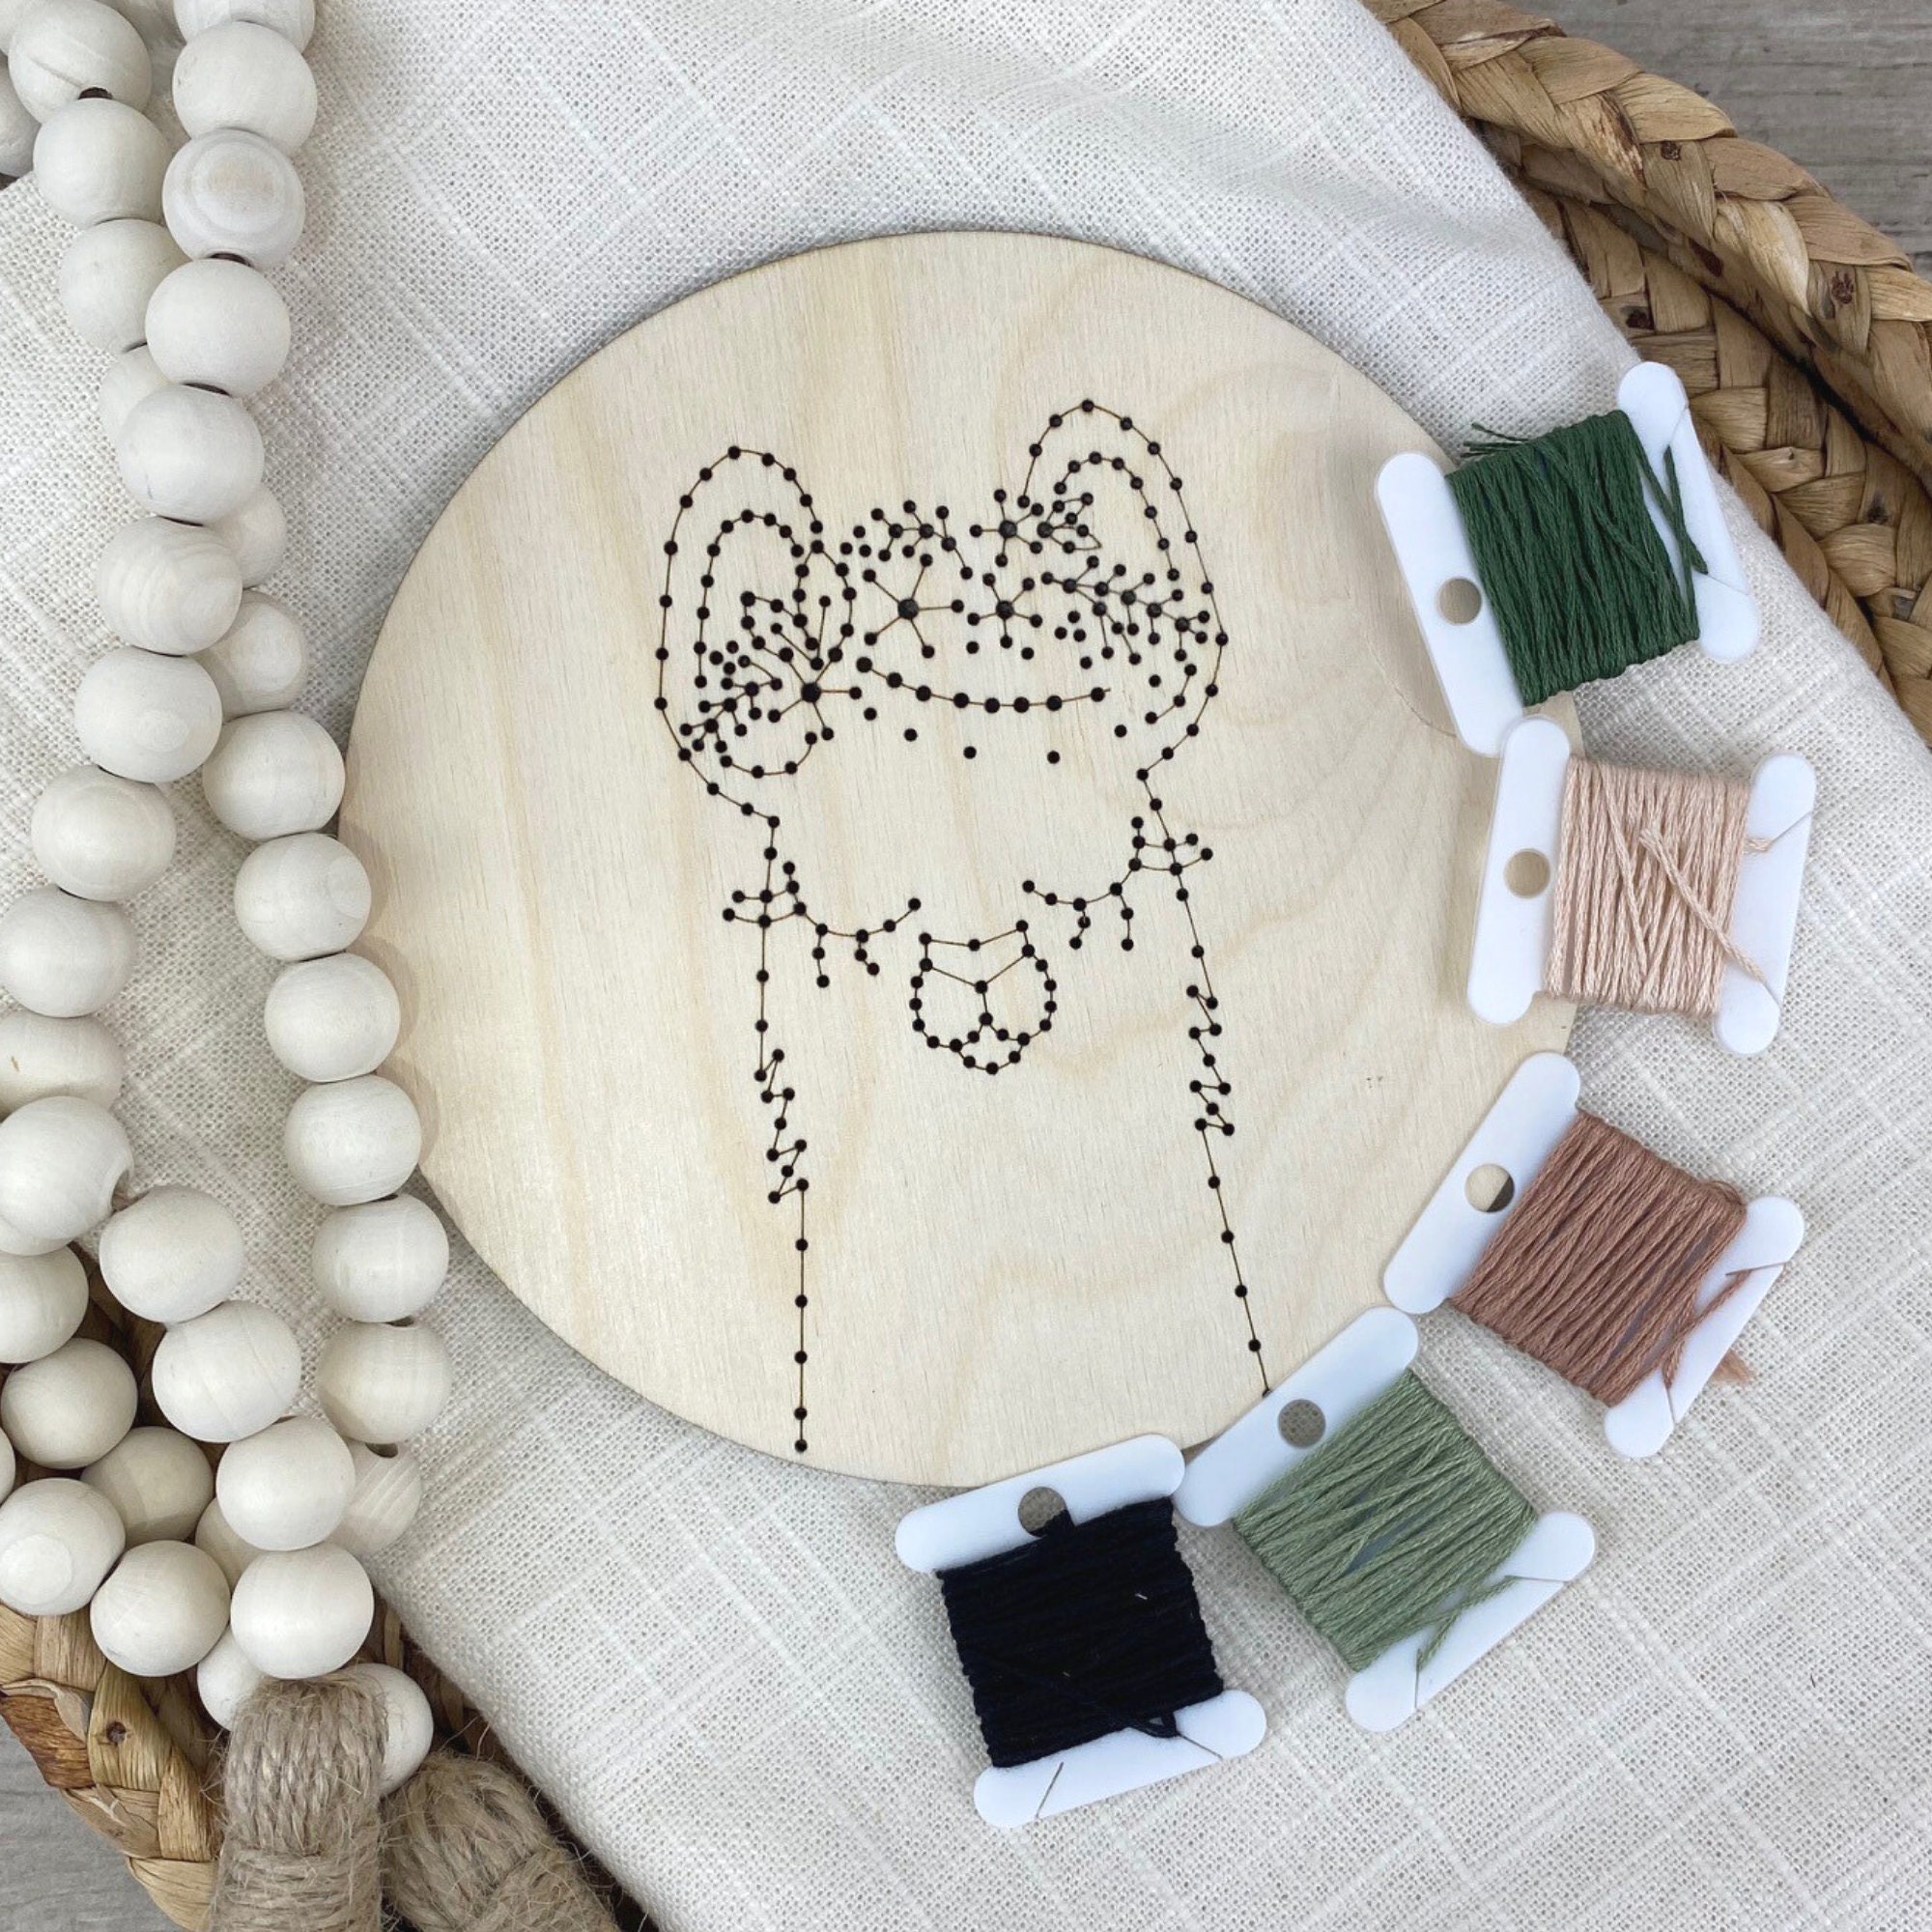 DIY Embroidery Kit for Beginners, Floral Embroidery Pattern, Wood  Embroidery, DIY Wooden Crafts, Adult Craft Kit Women, Wooden Embroidery 